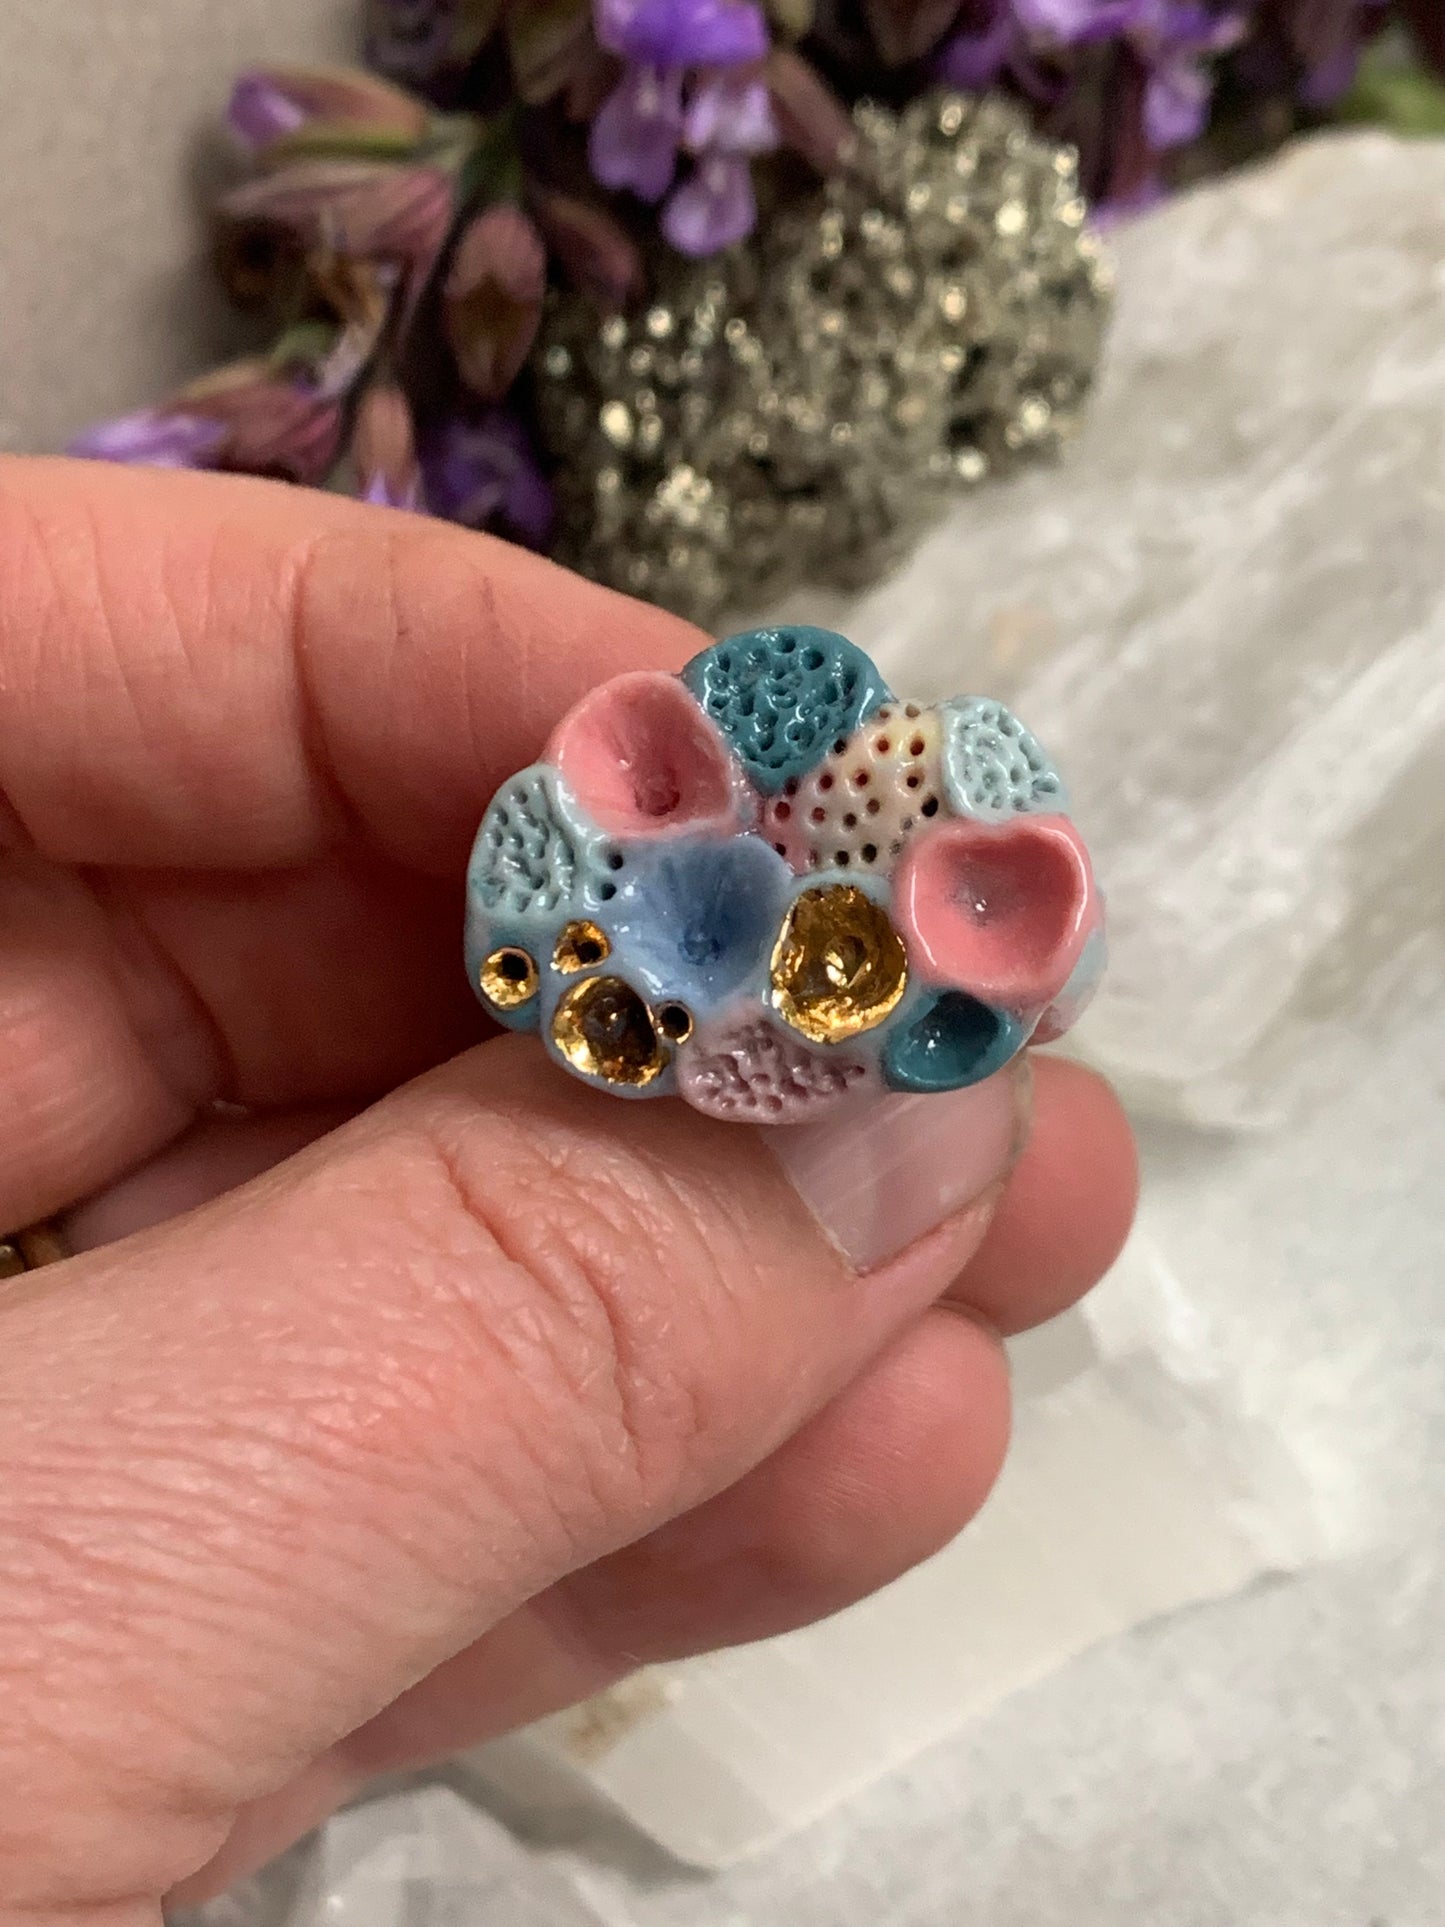 One gold  lustre with Blue/ pink / purple  tones ‘rock coral’ porcelain ring